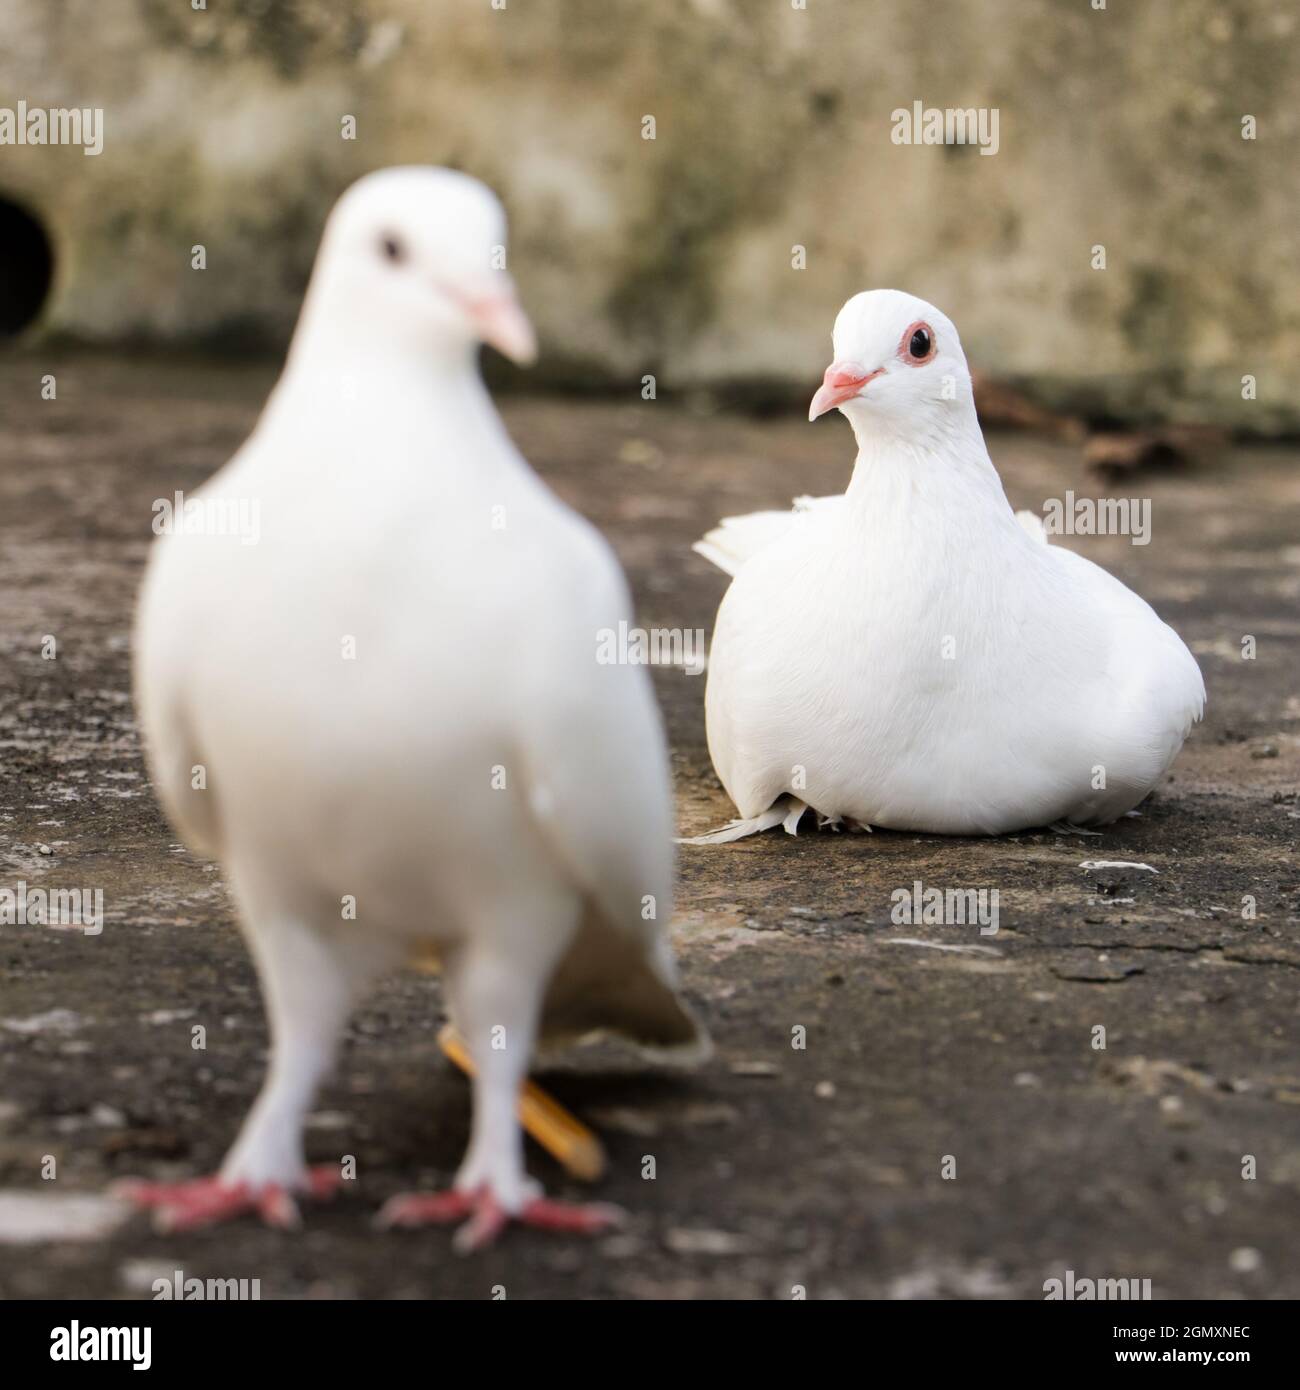 selectively focused photo of two white homing domestic pigeons, one standing in the front and the other sitting at the back during a bright morning Stock Photo